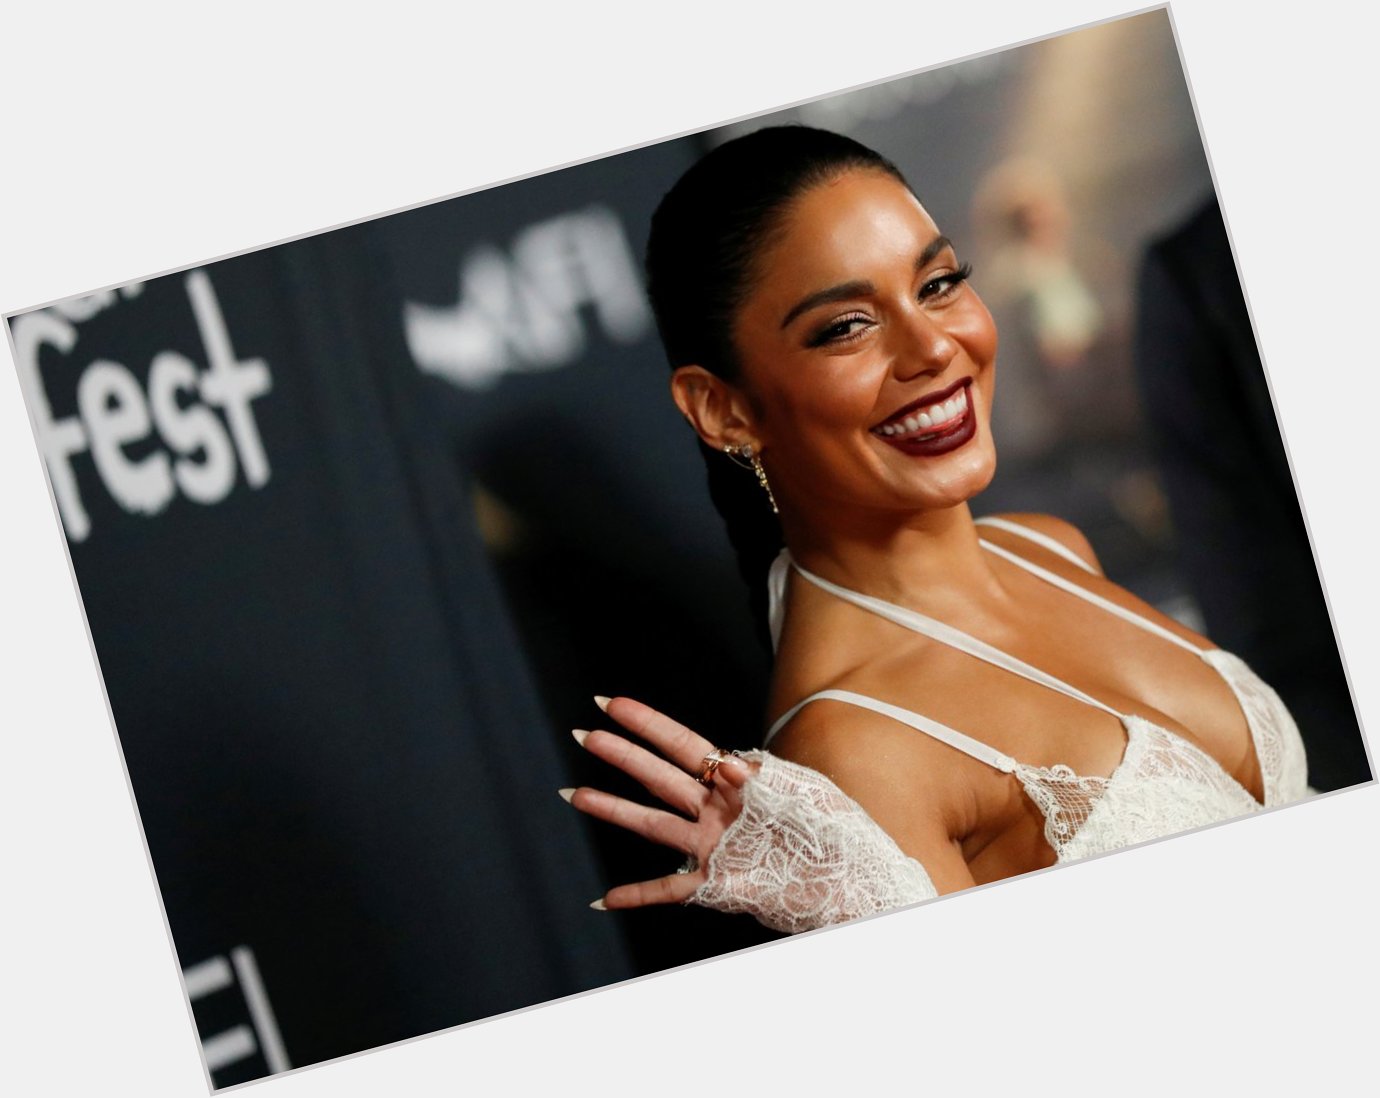 Huge happy birthday shoutout to the multi-talented Vanessa Hudgens! (Reuters) 